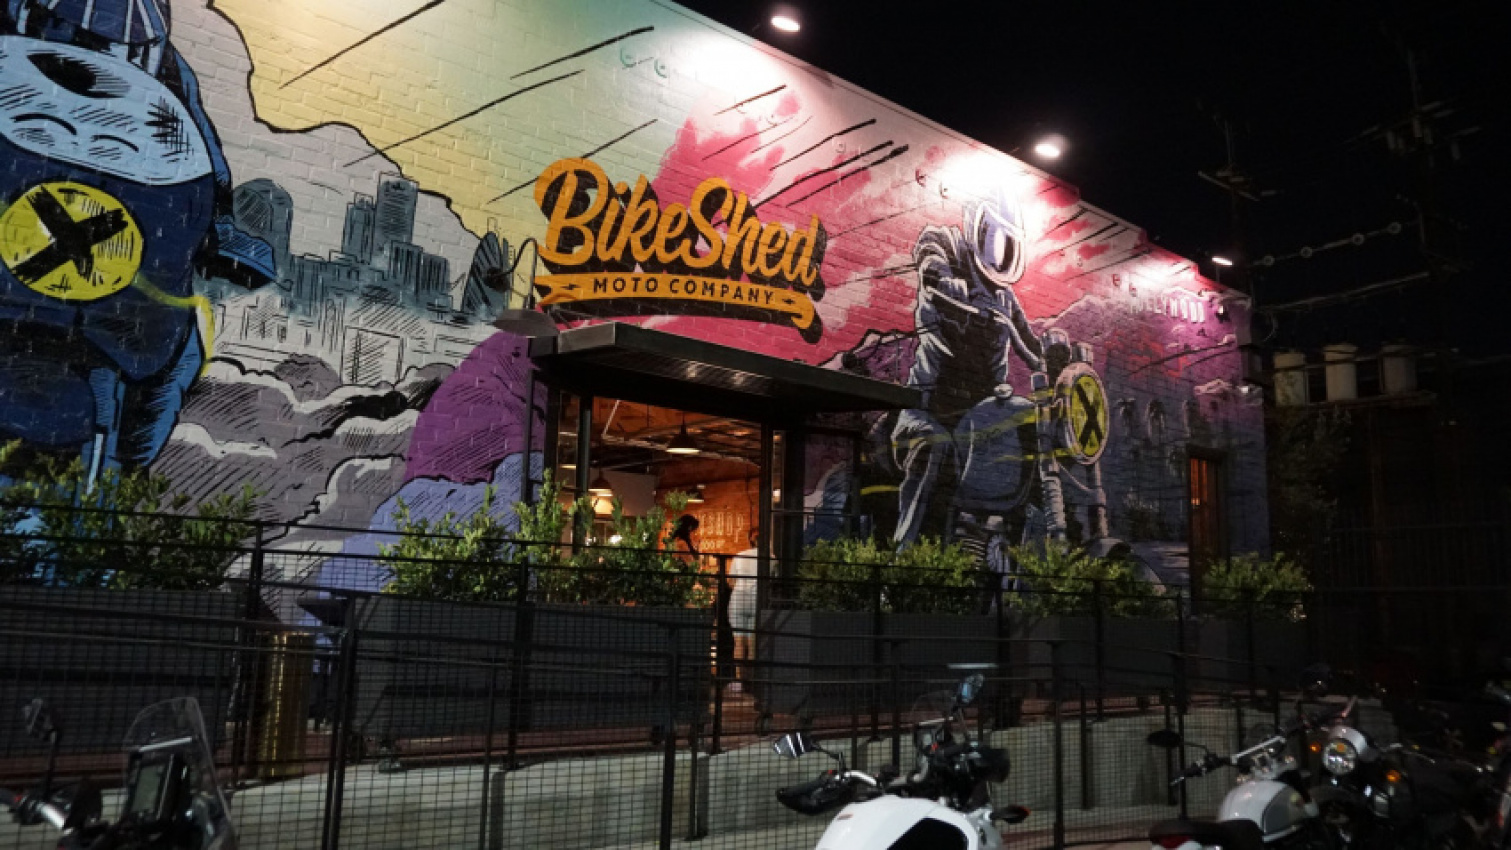 autos, car life, cars, classic cars, los angeles’ bike shed is the cool new place to park your motorcycle, hang out